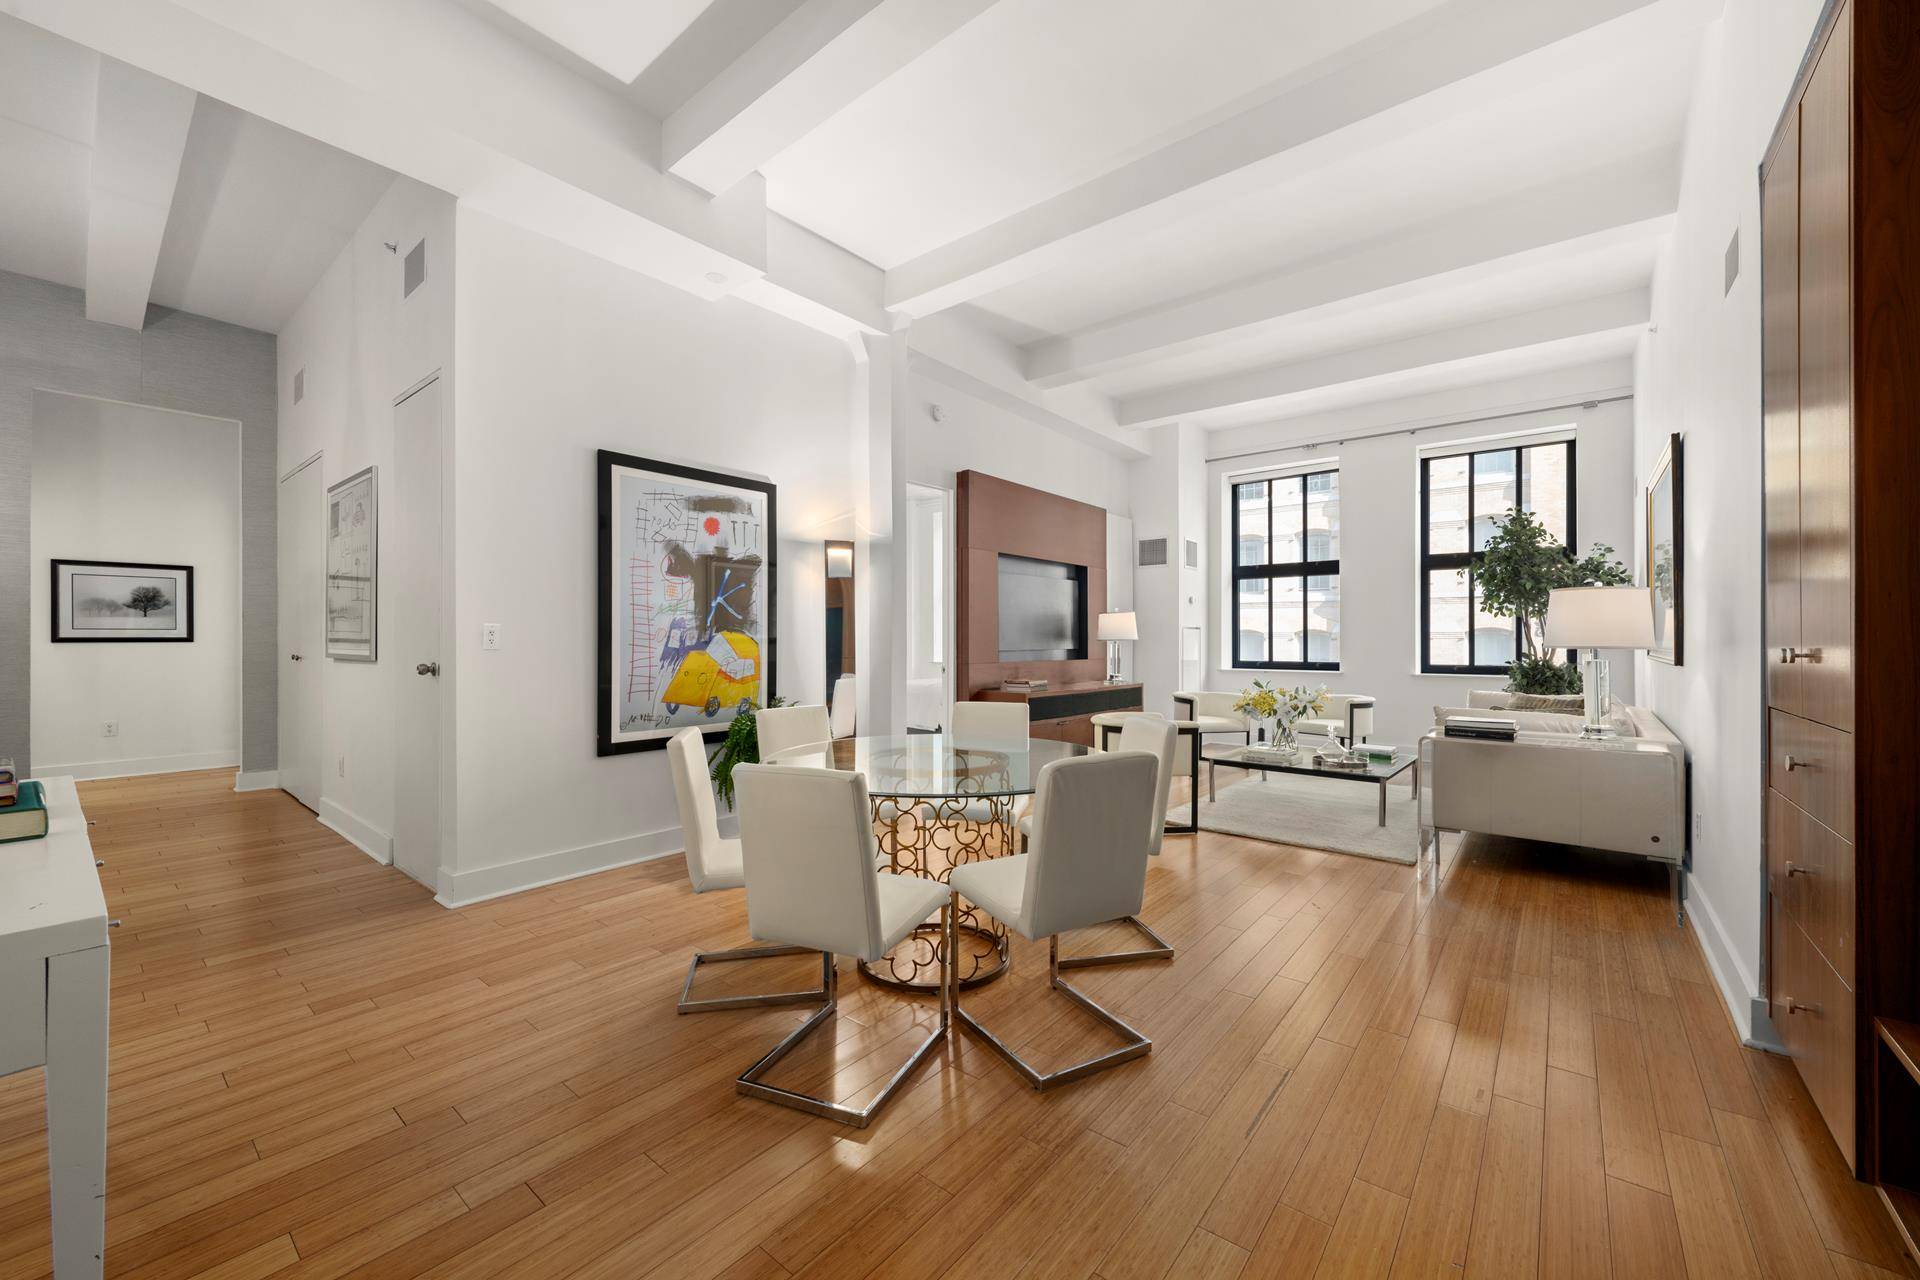 Light, luxury and exquisite living envelope you in this stunning 3 Bedroom, 4 Bathroom loft with 2, 461 square feet at 415 Greenwich Street, one of Tribeca's premier full service ...